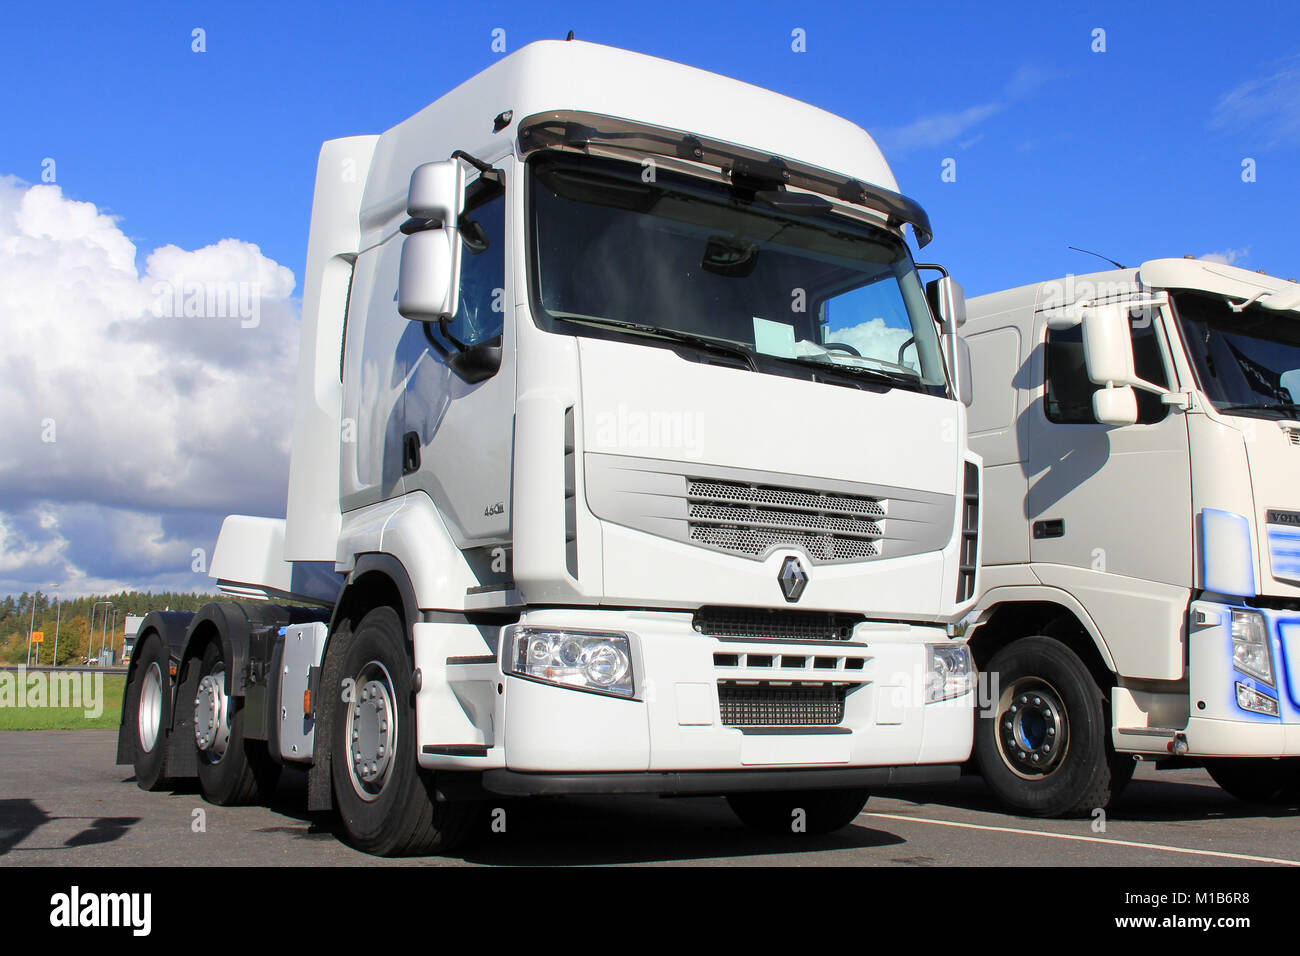 FORSSA, FINLAND - SEPTEMBER 22: White Renault Premium 460 Truck on September 22, 2013 in Forssa, Finland. The model features Automatic Engine Stop, wh Stock Photo